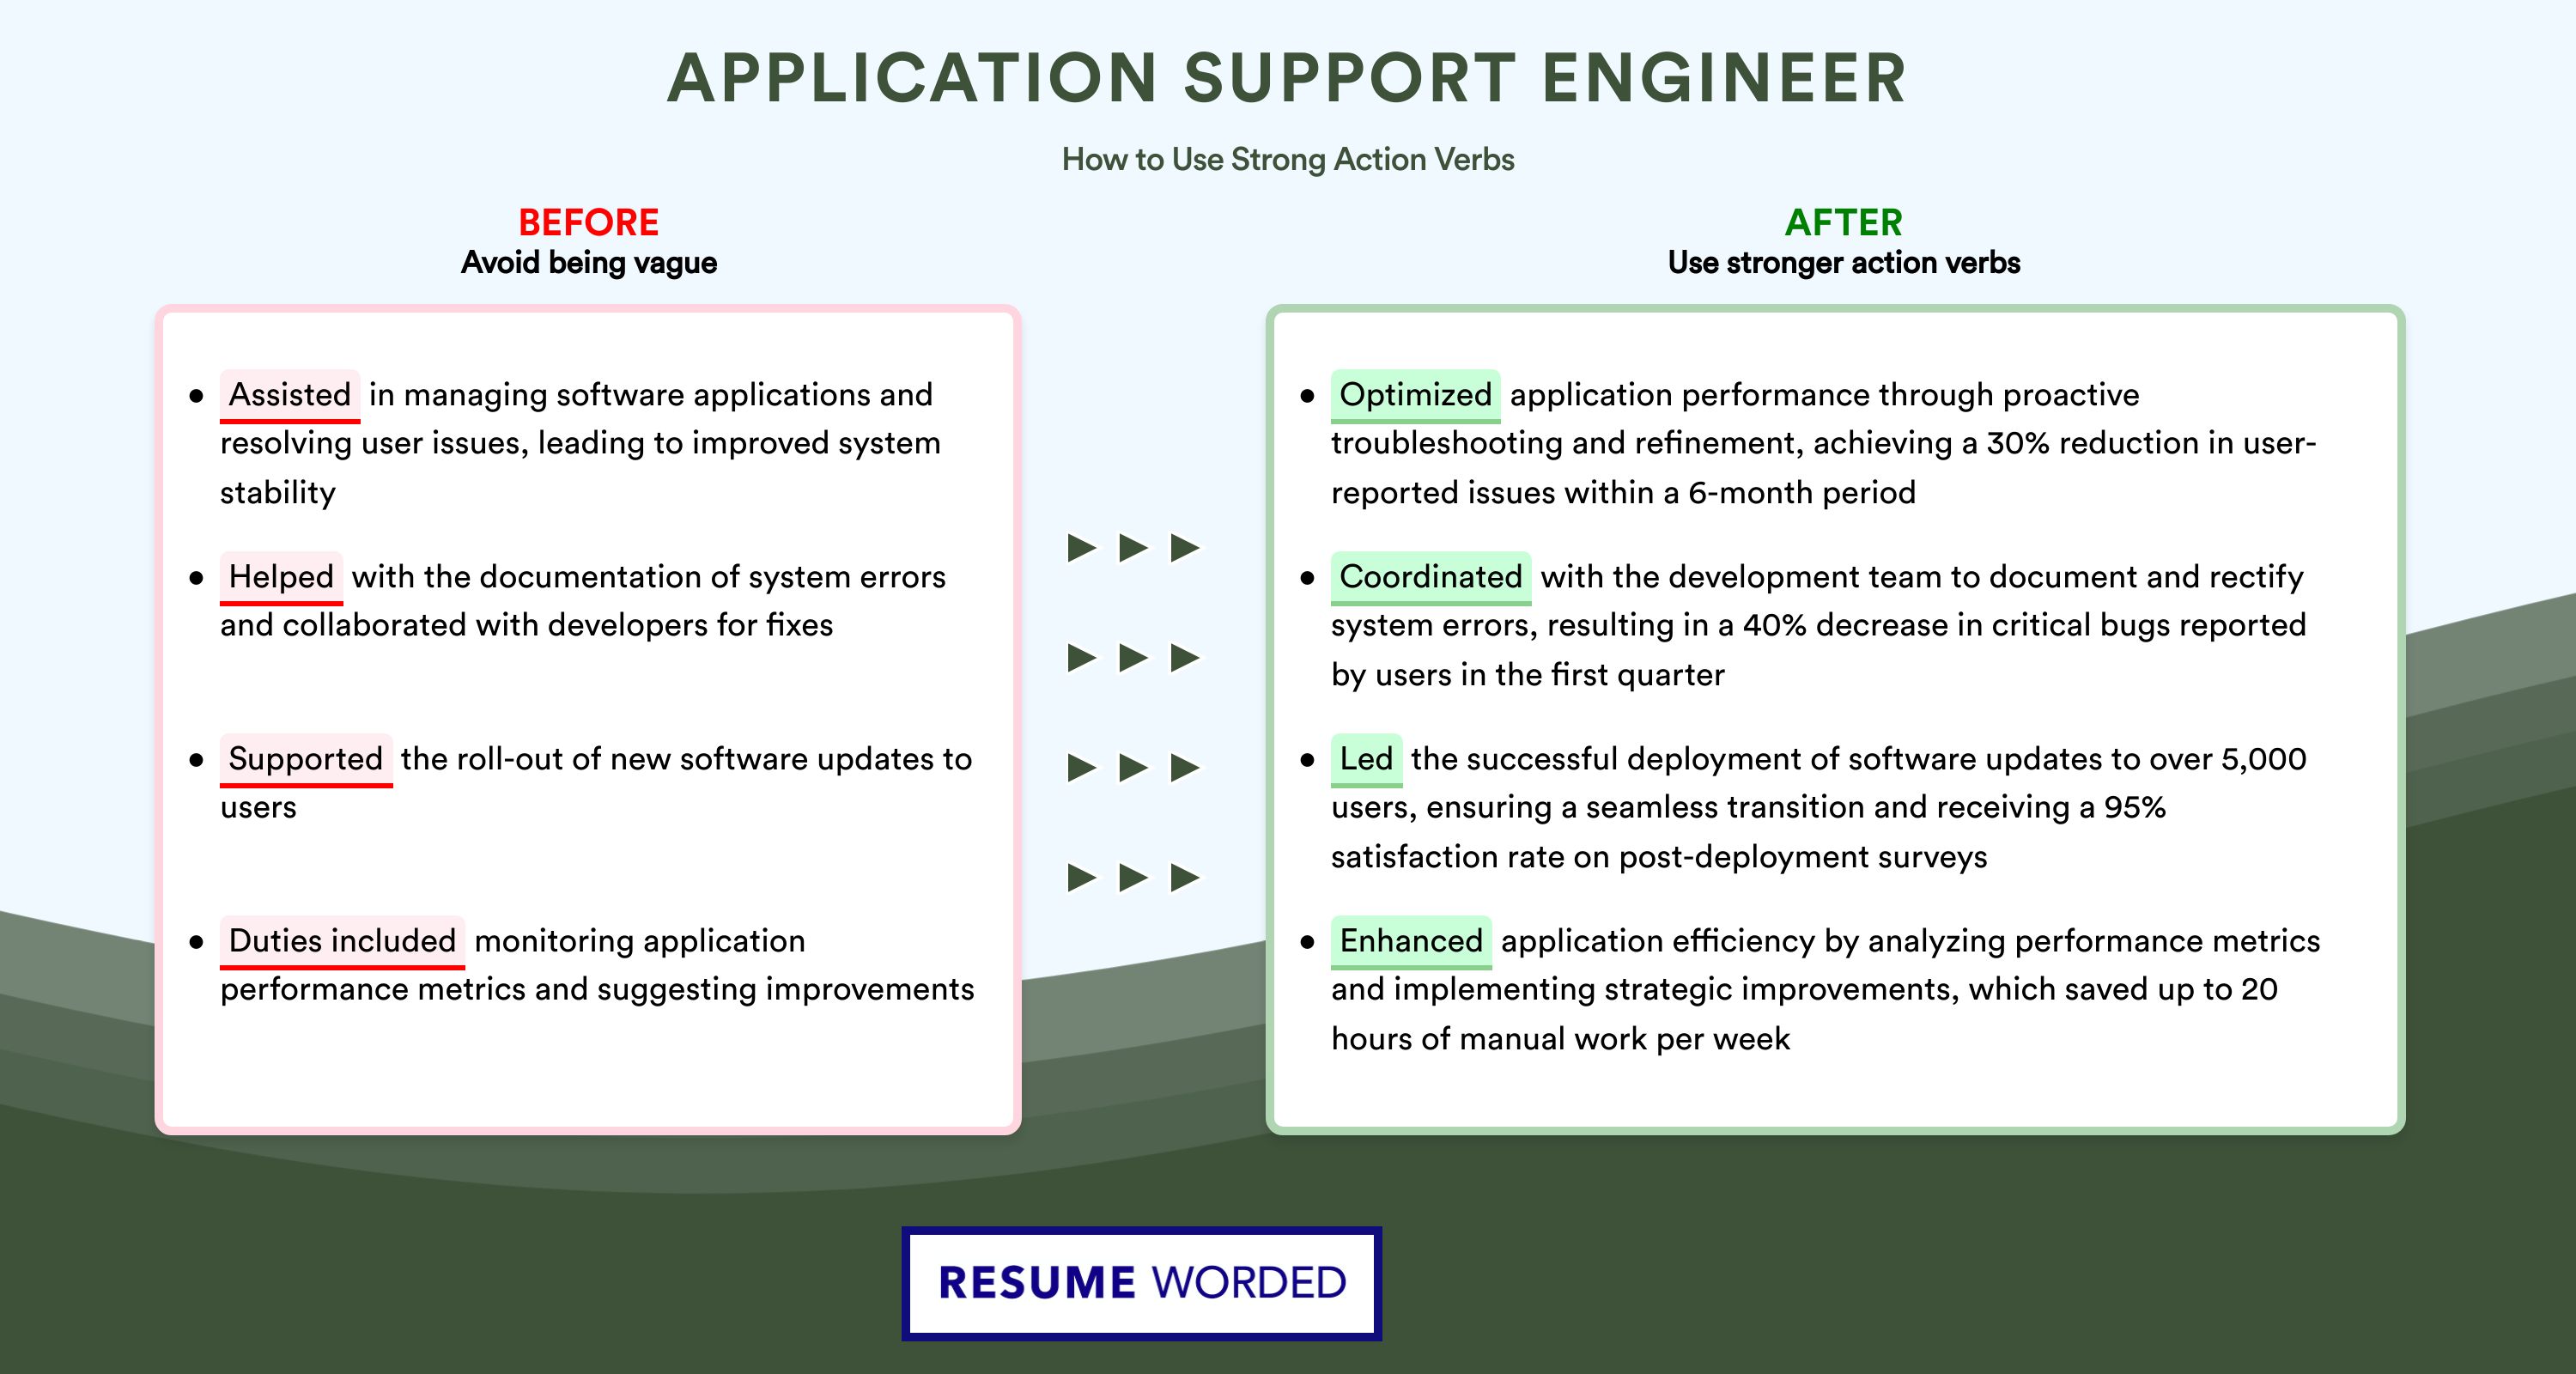 Action Verbs for Application Support Engineer